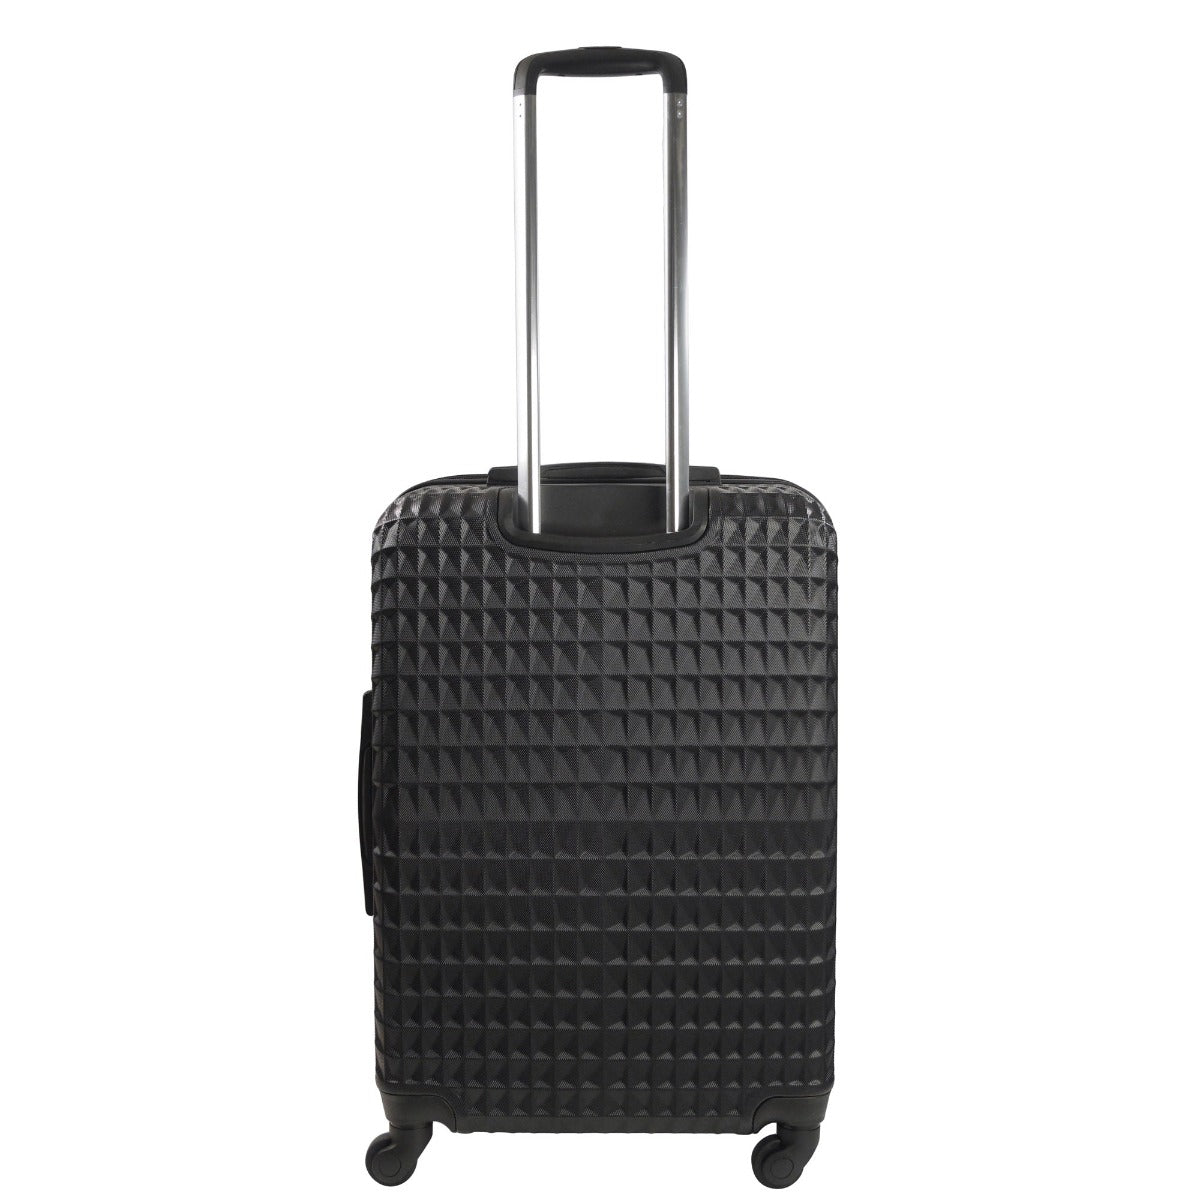 Ful Geo 26" checked luggage bag hard sided spinner suitcase black